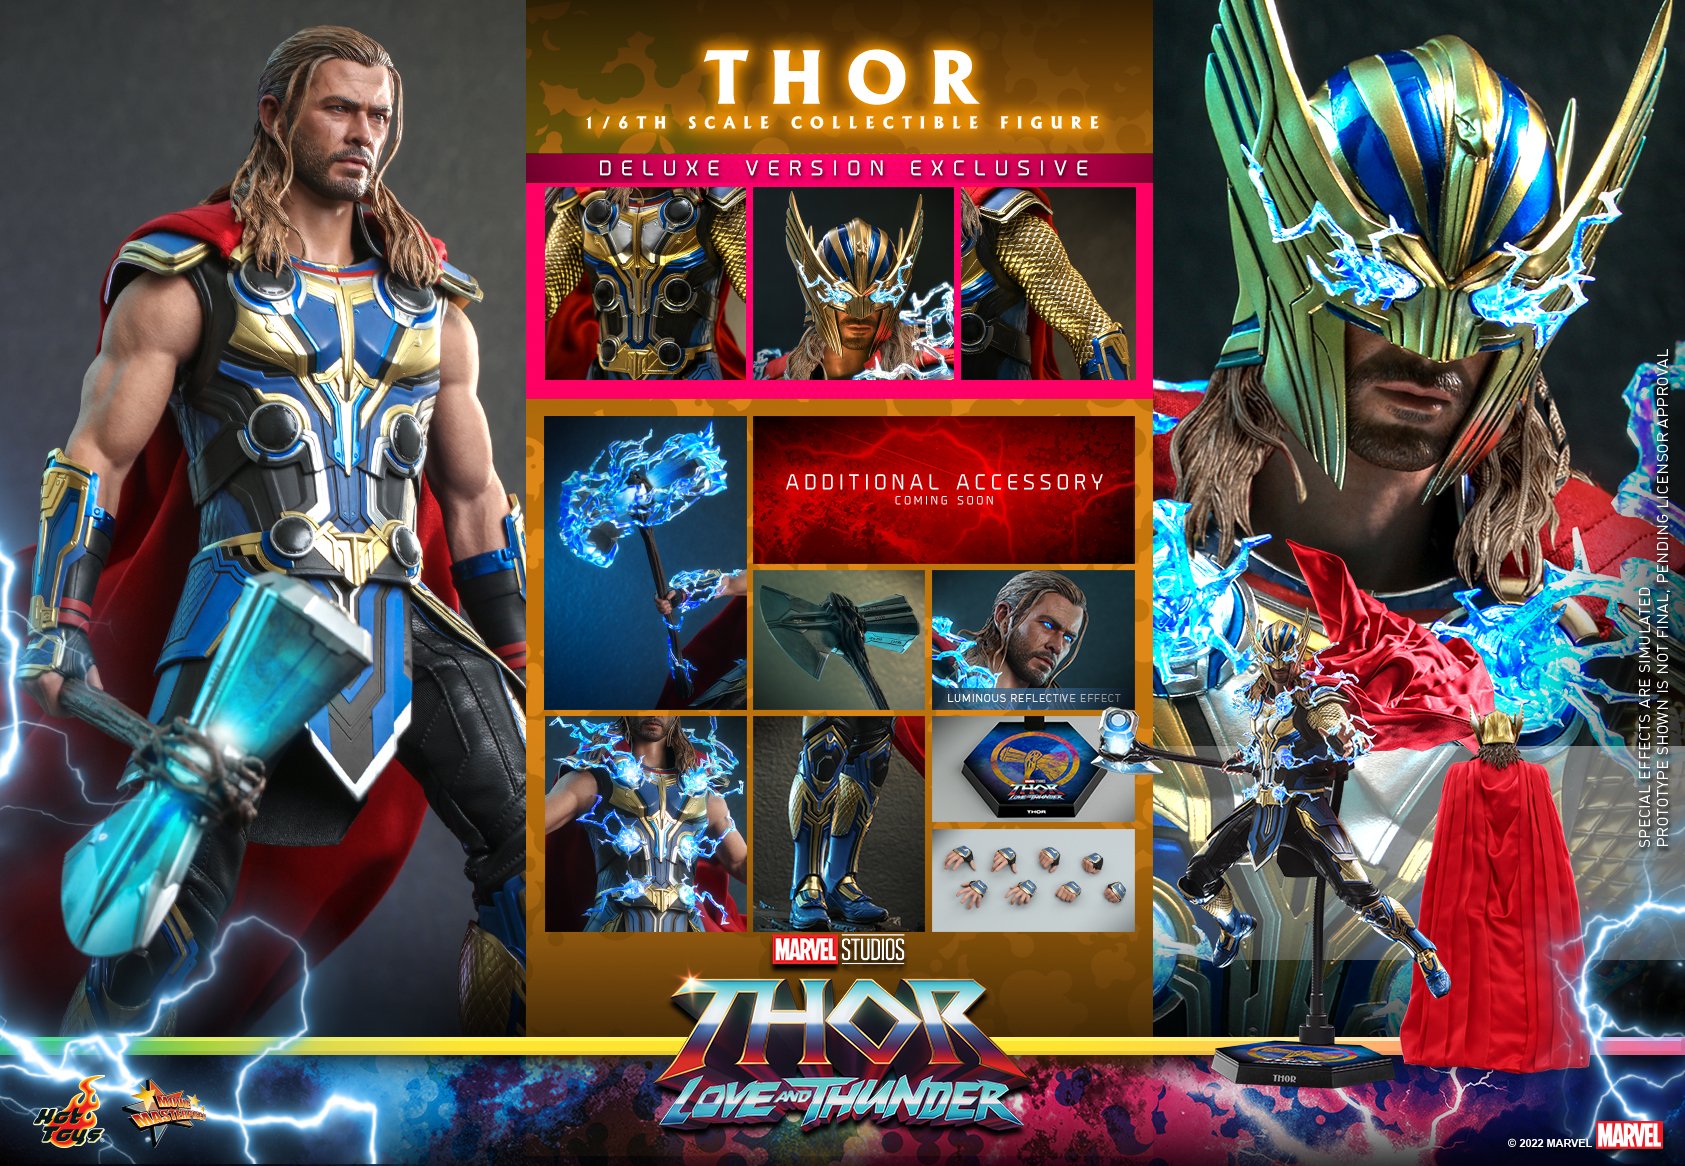 Gorr - Thor: Love and Thunder - Hot Toys MMS676 Collectible Figure